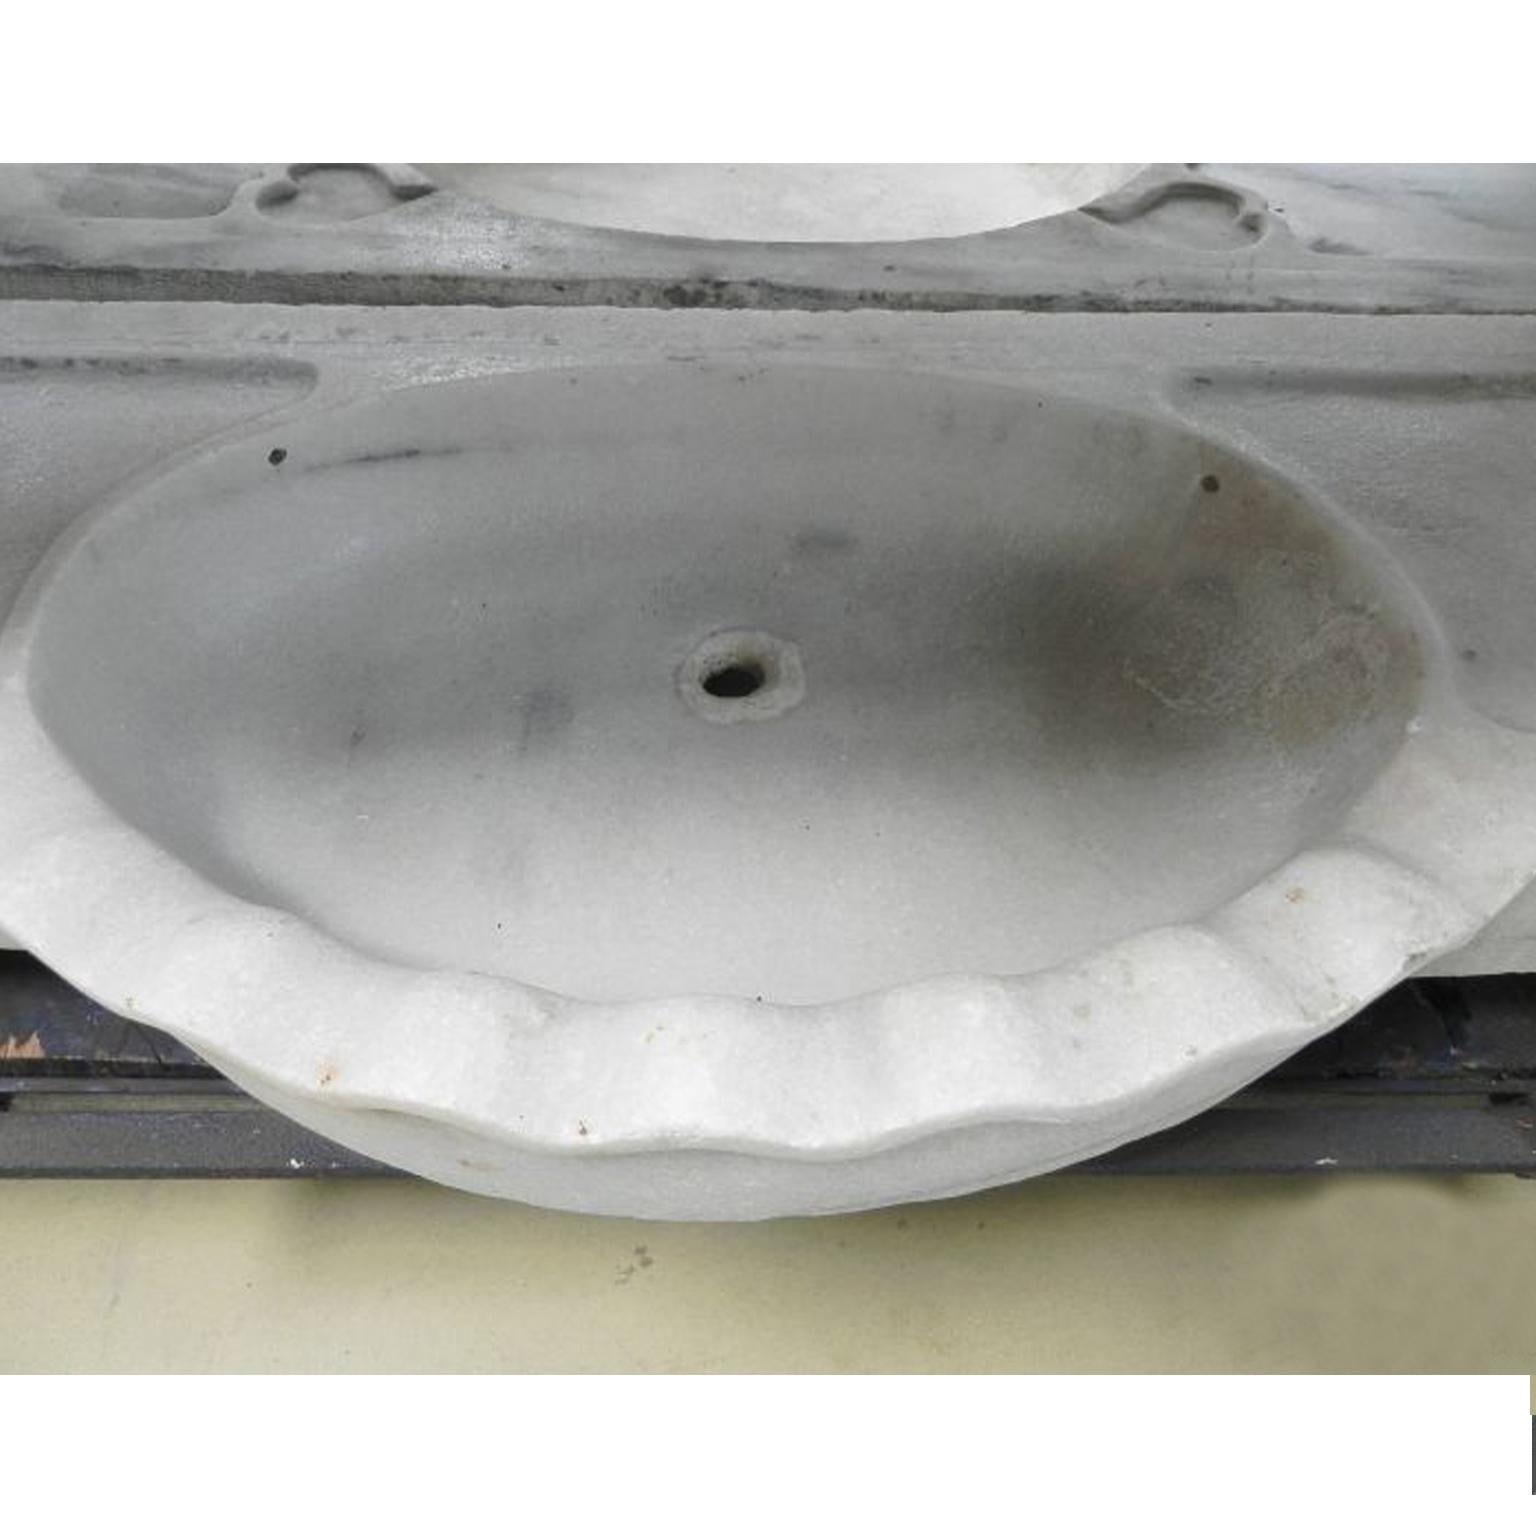 We are now manufacturing this model in Carrara marble
Custom sizing available

As tradition this timeless Italian classical sink is cut from one single block of white marble, the designs have not changed since Greek and Roman times, it carries